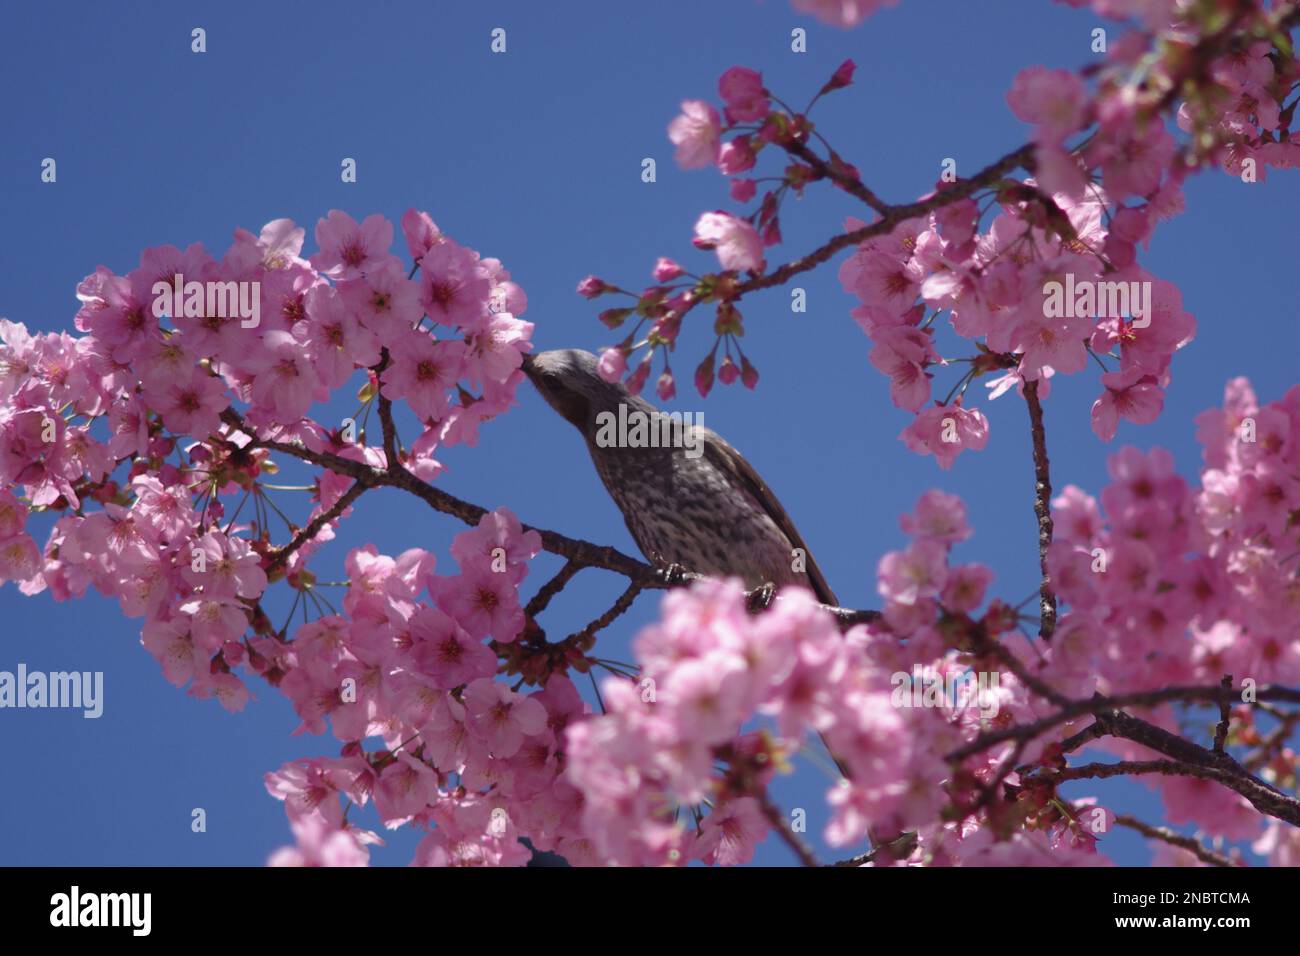 Bird and cherry blossoms Stock Photo